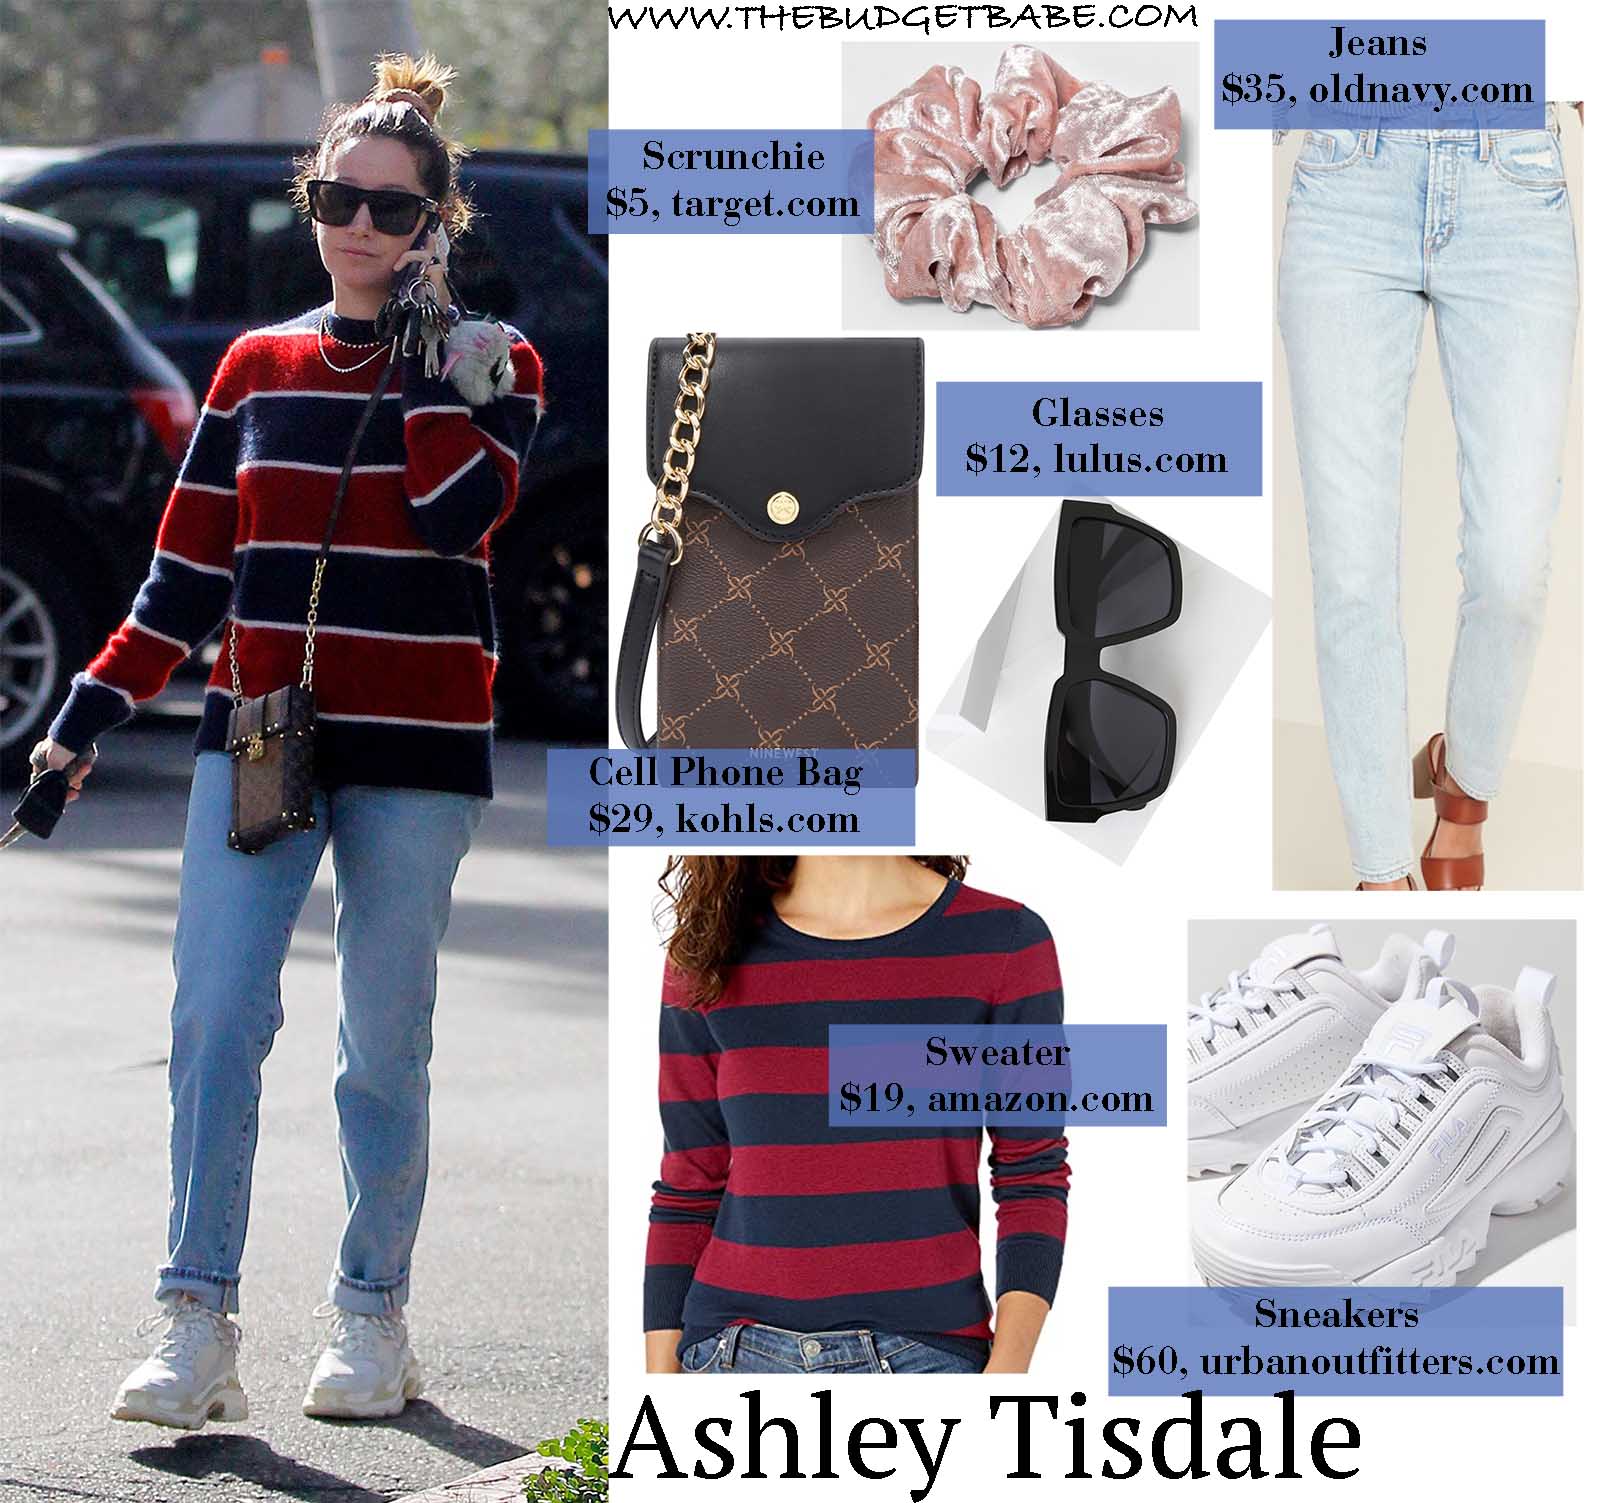 Ashley Tisdale's look is our new winter uniform!